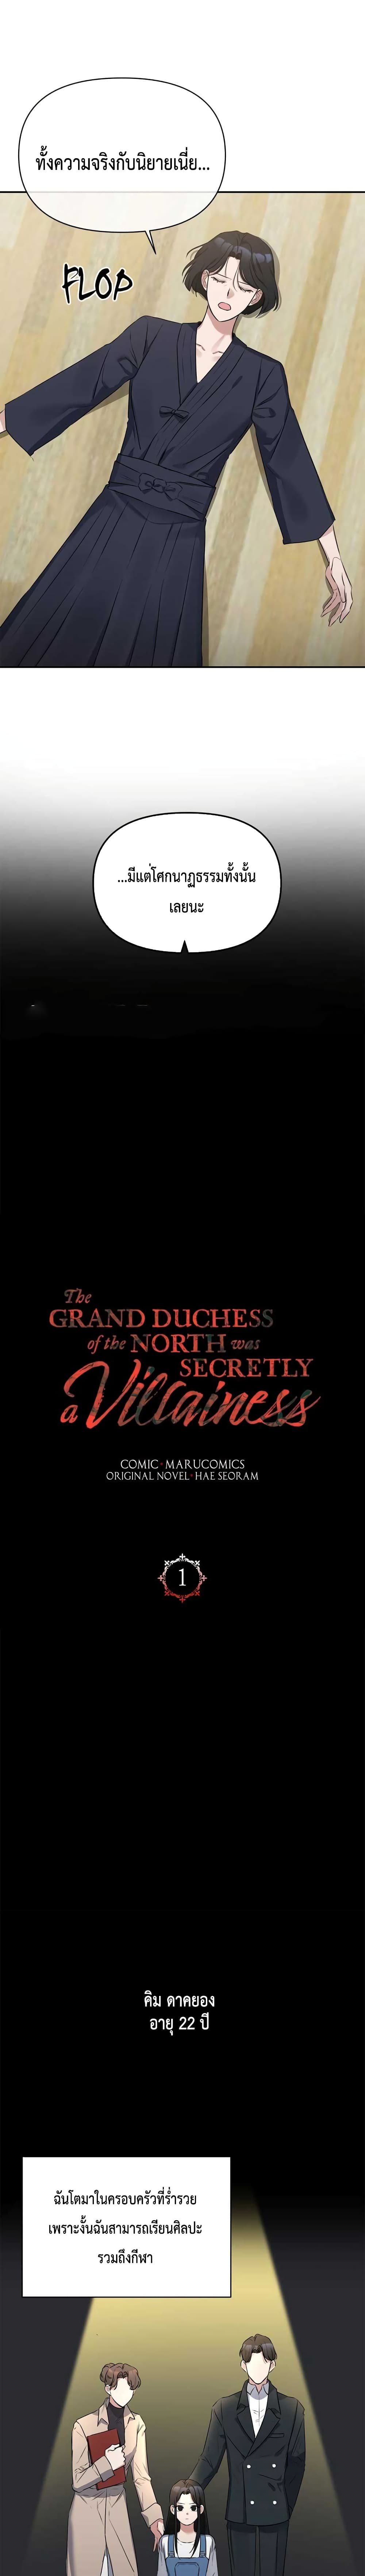 The Grand Duchess of the North Was Secretly a Villainess 1-1